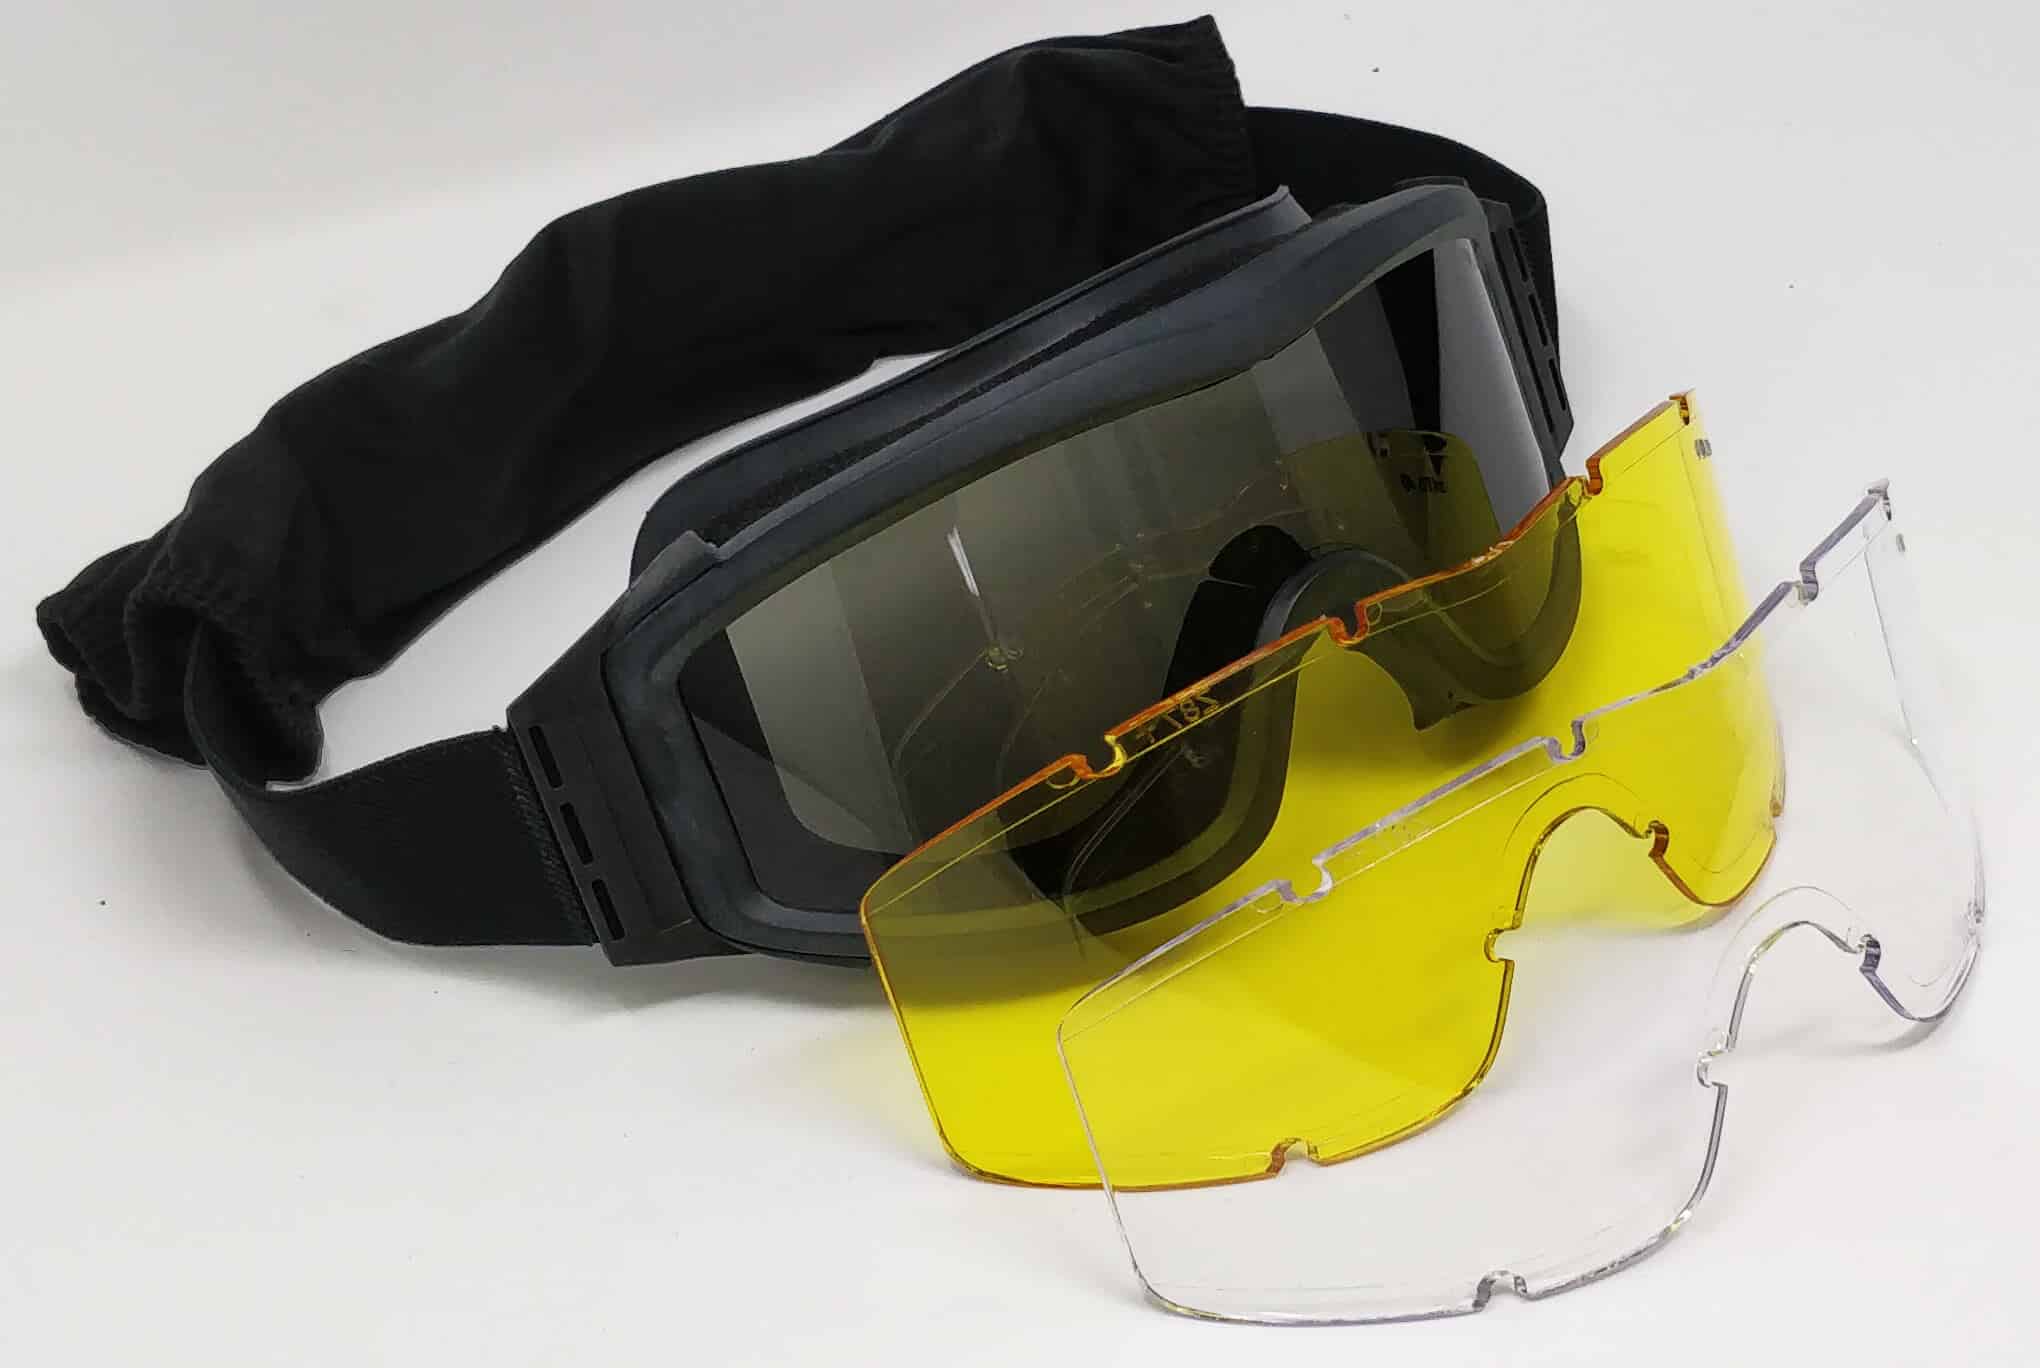 KIRO Goggle for Shooting and Tactical Environments with 3 Types of Lenses